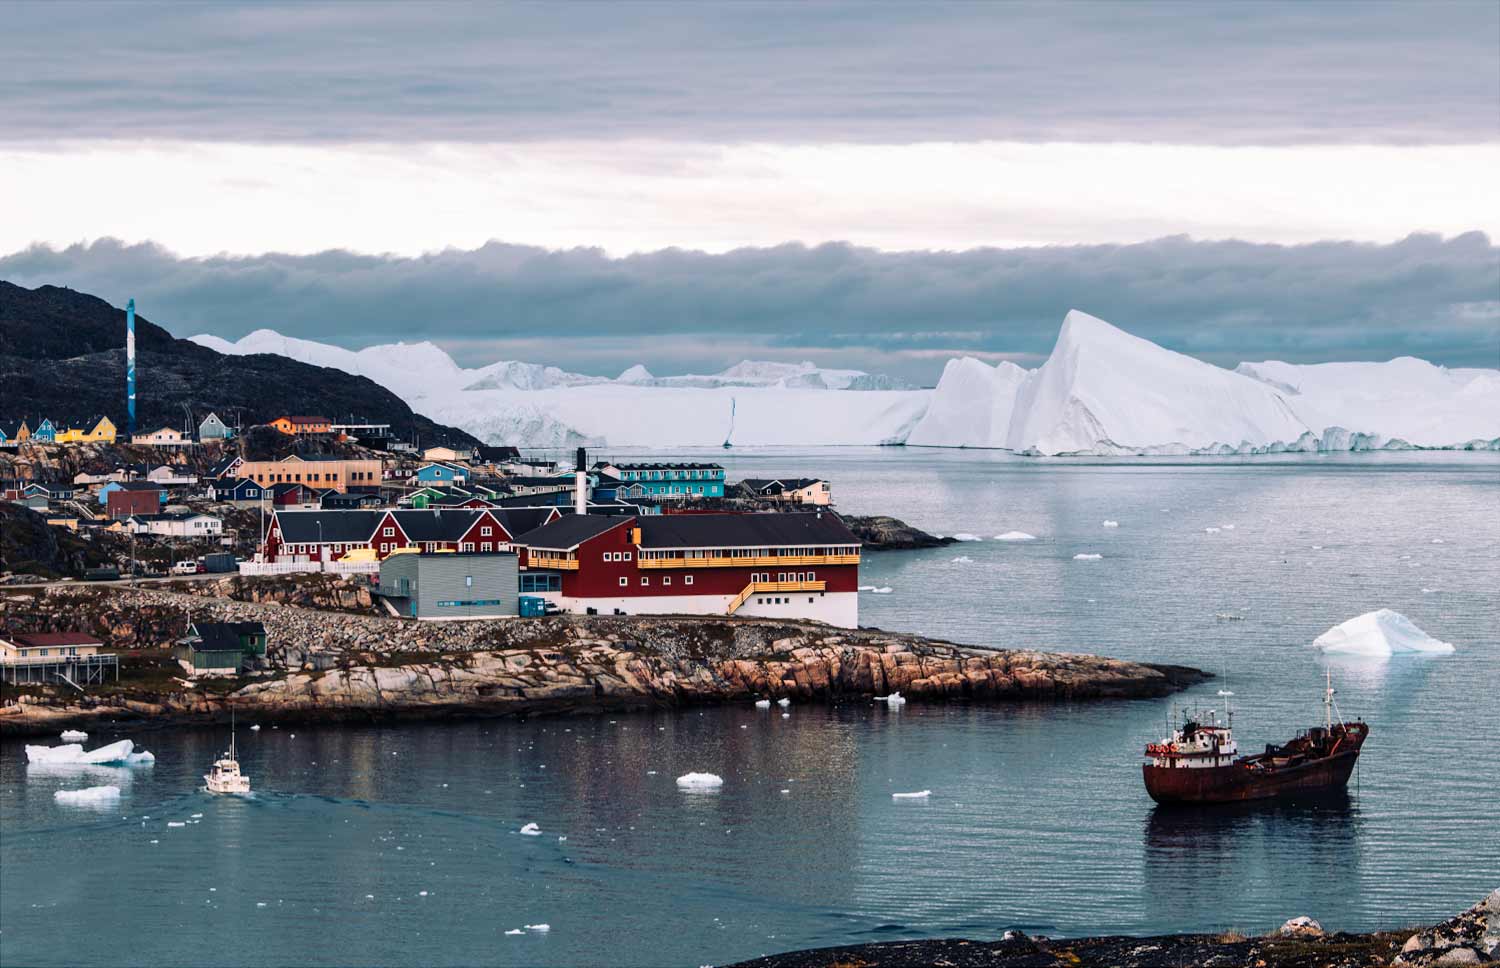 Exploring Ilulissat: Charming town views during a 10-day journey in Greenland